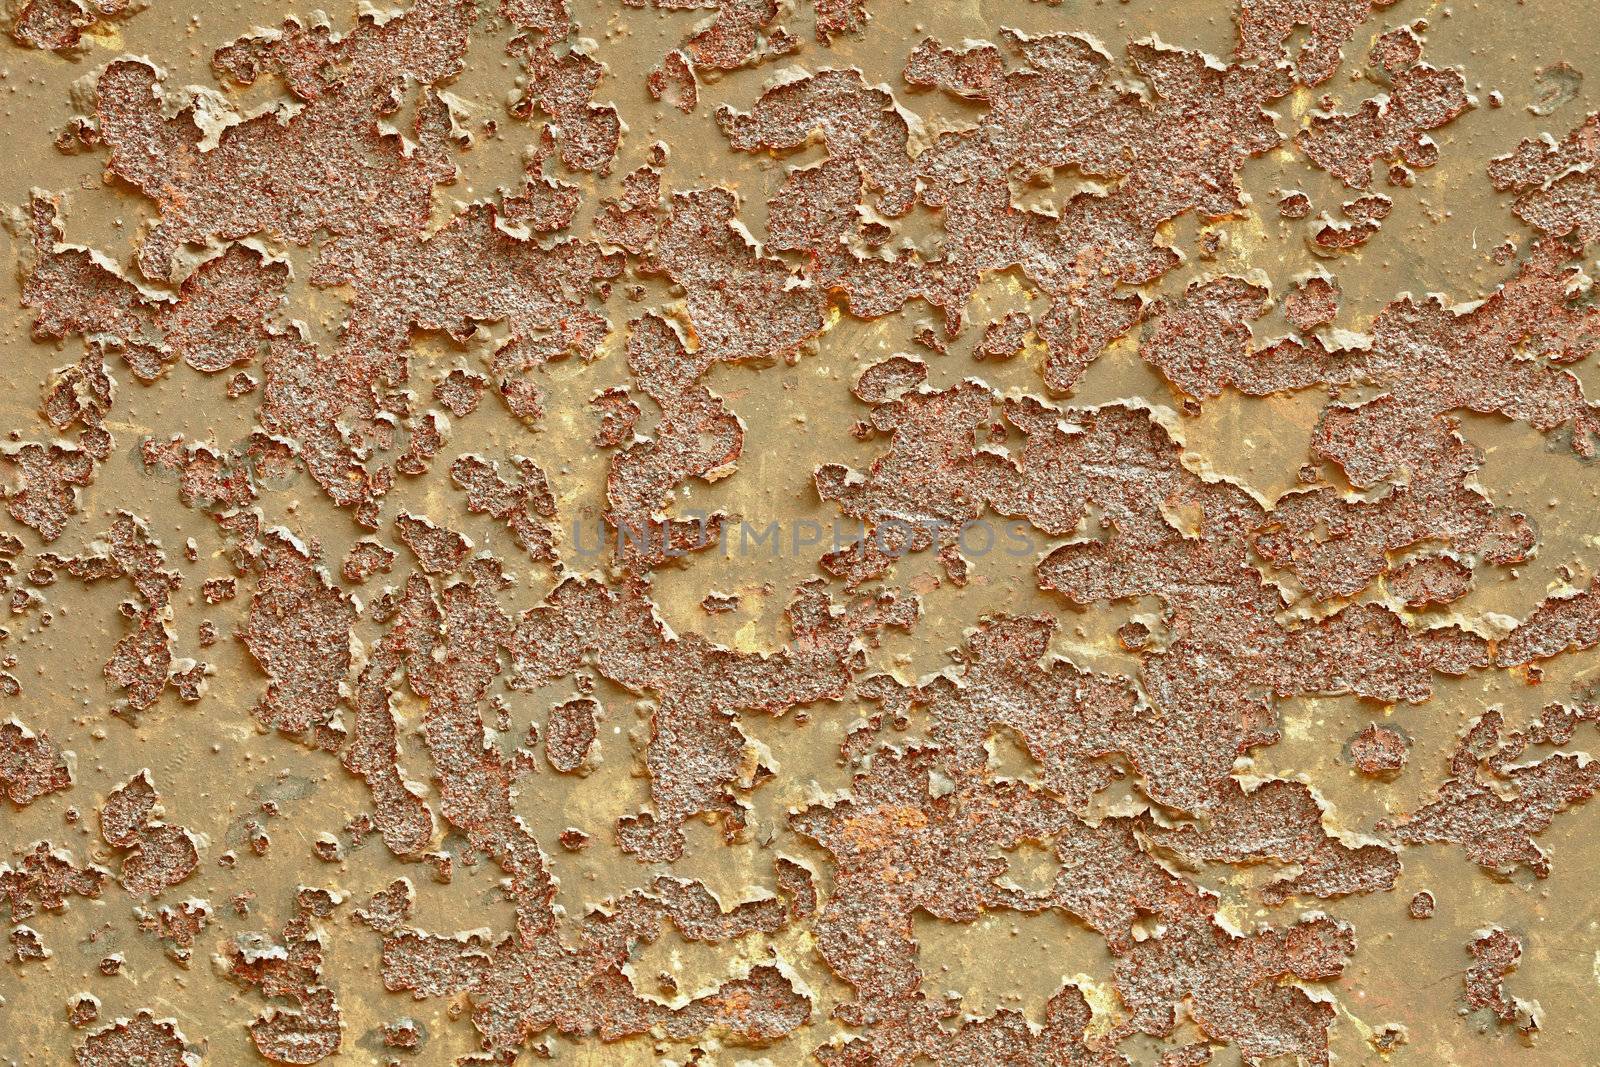 Remains of paint on rusty surface - background